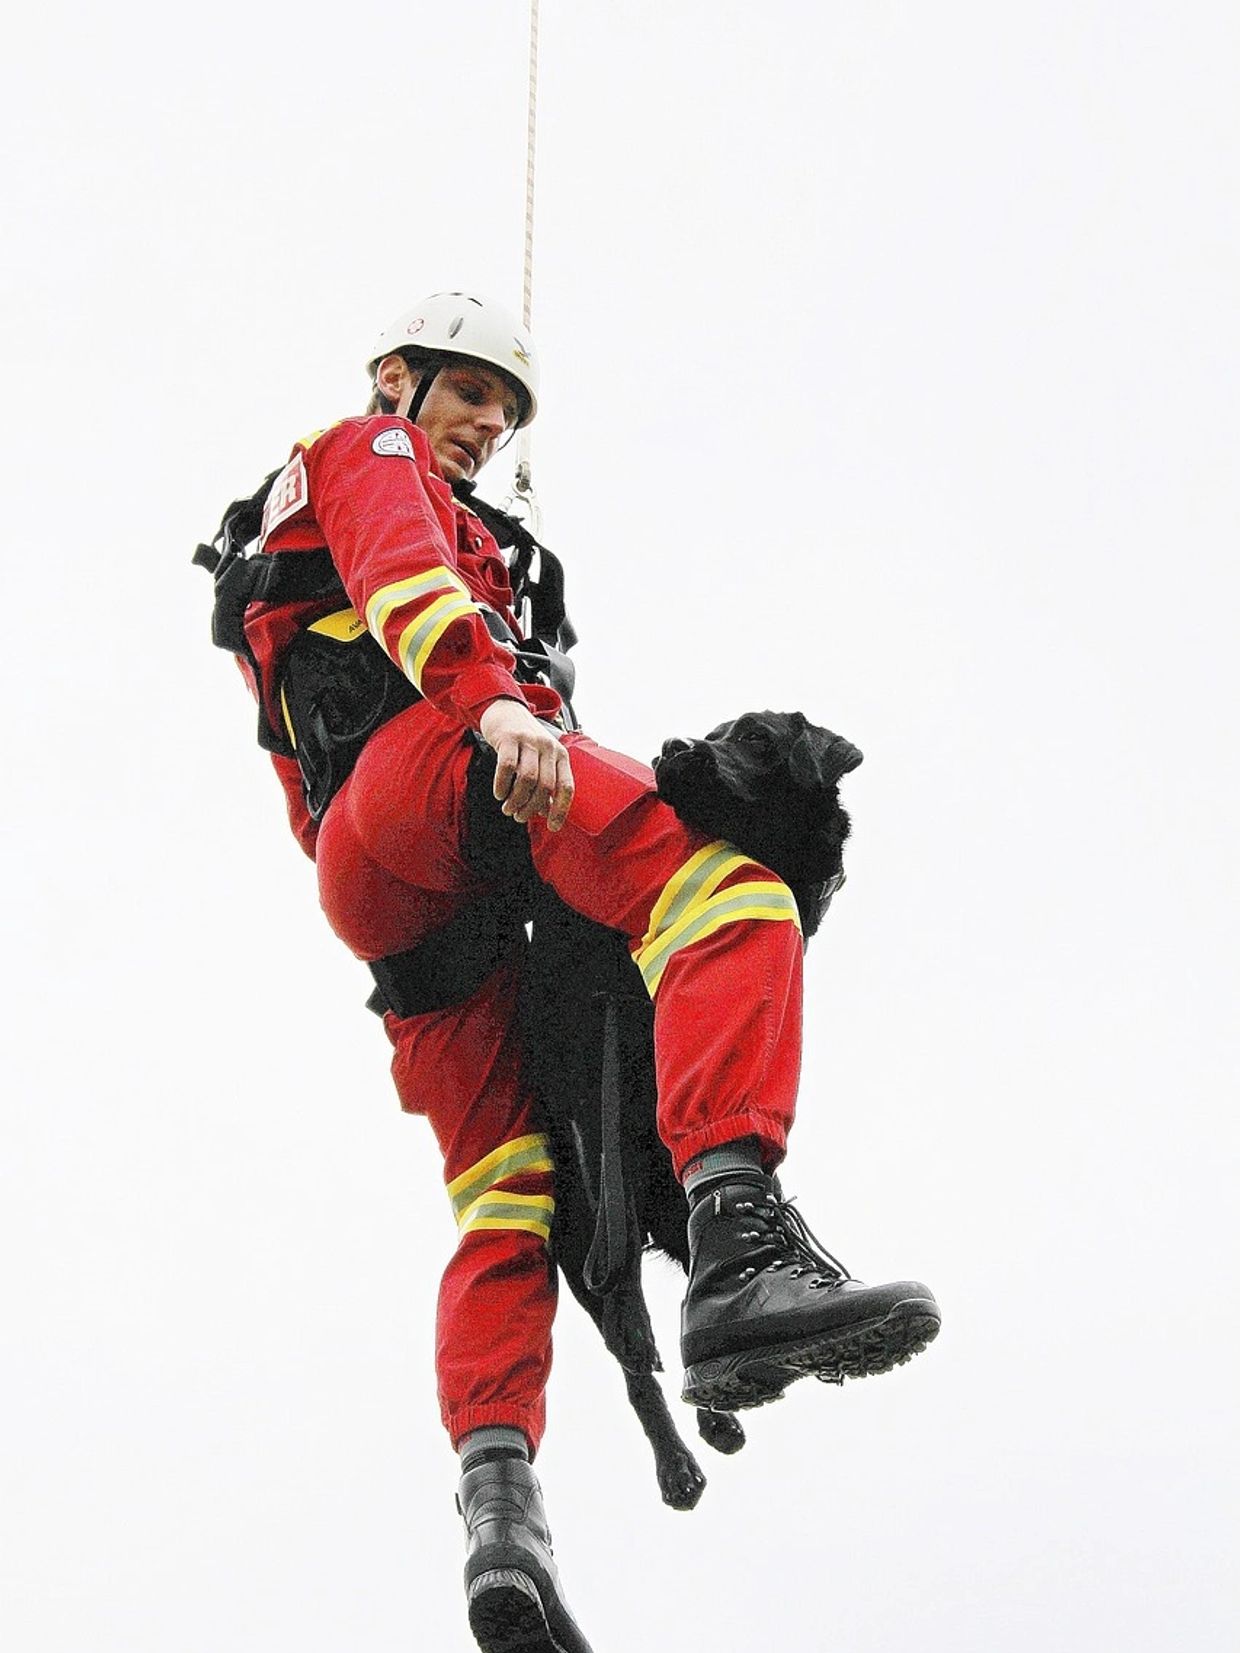 Rescue worker repelling with a dog 